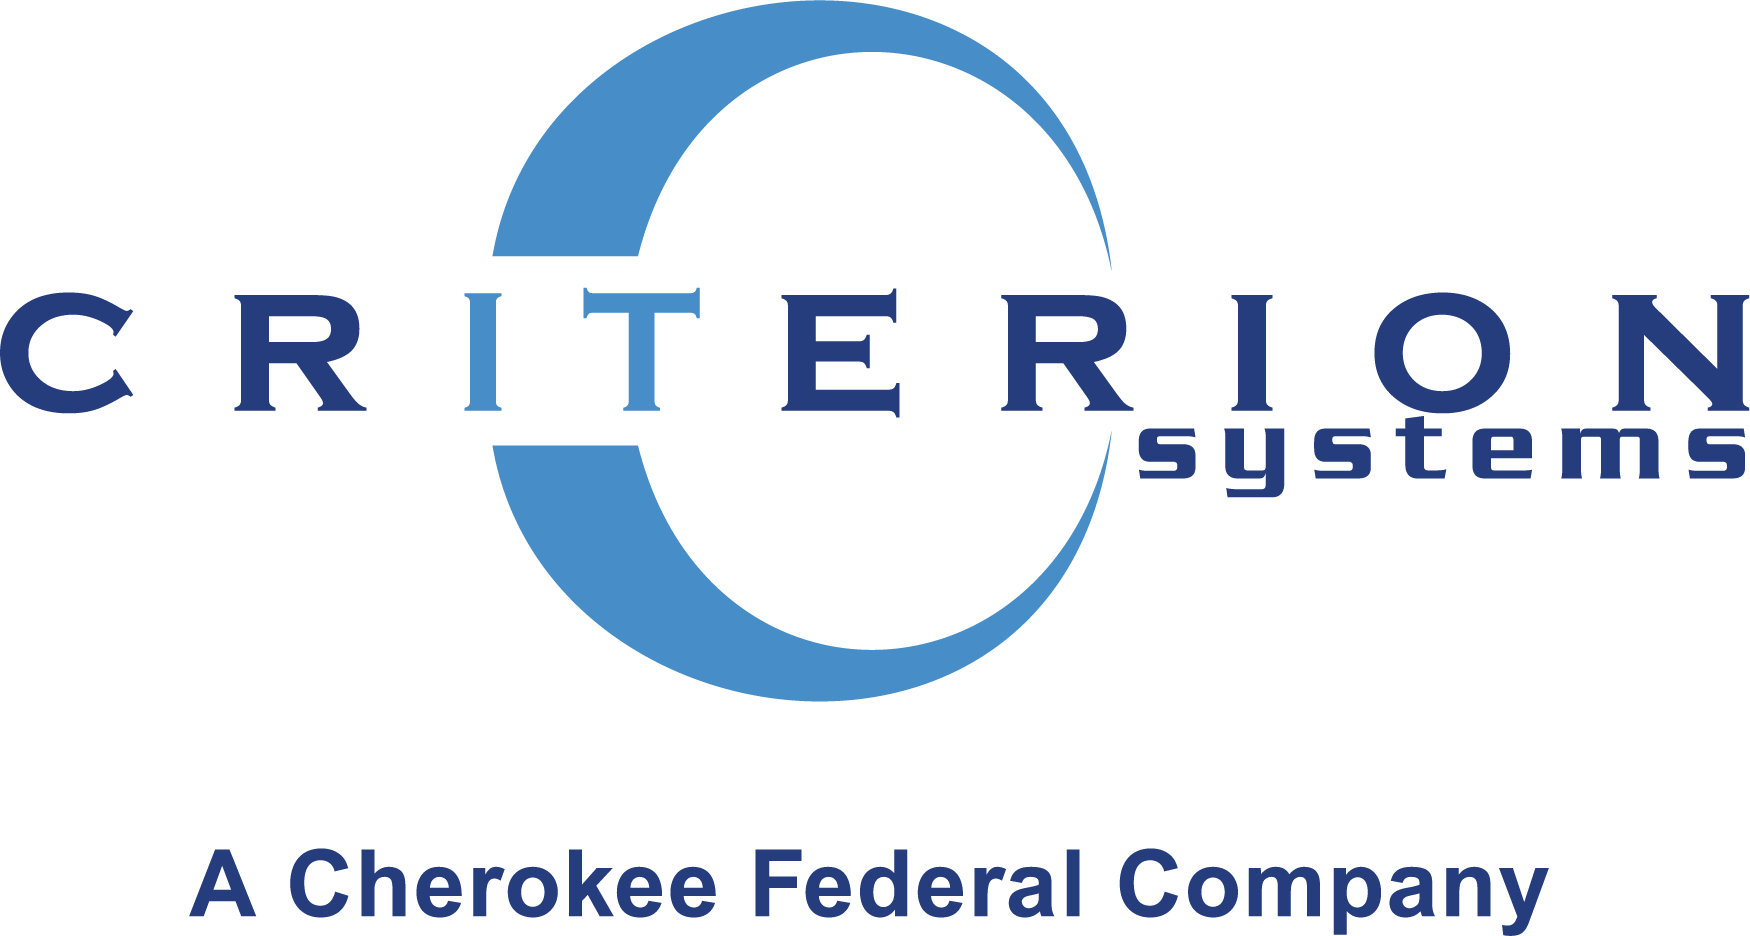 Criterion Systems, Inc